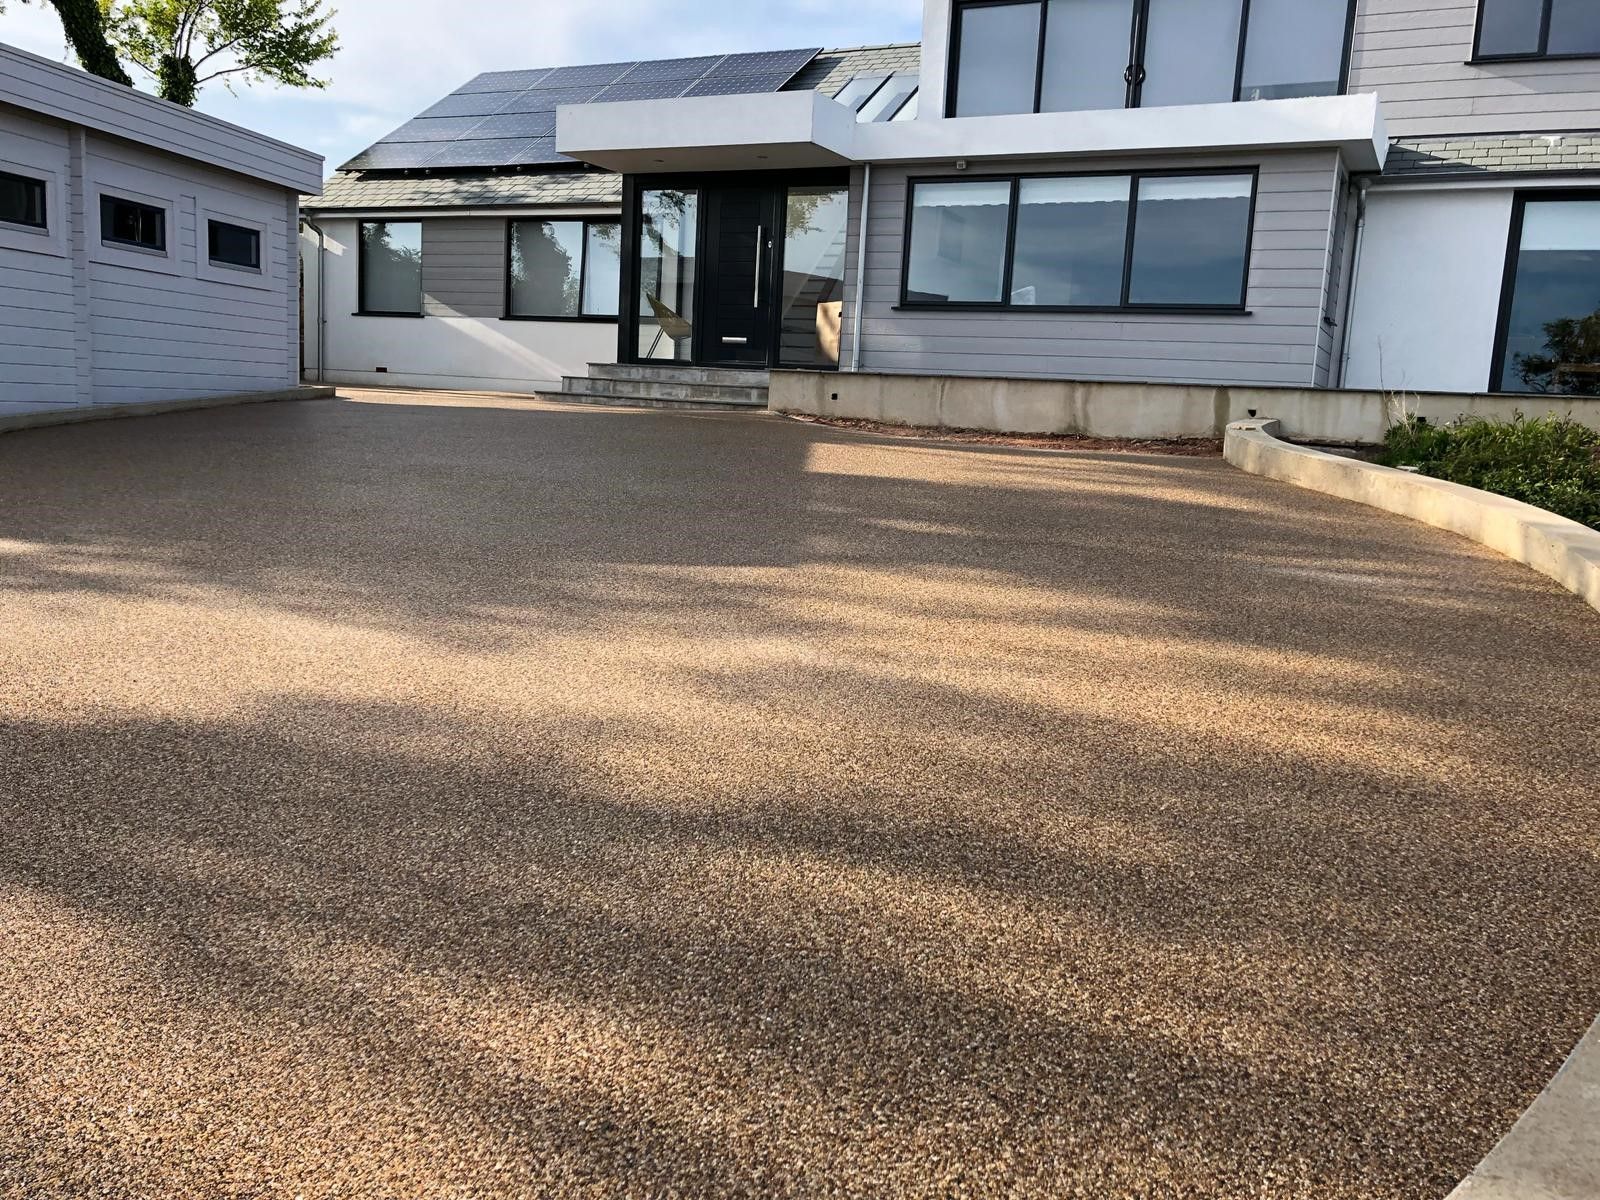 example of a resin bound driveway